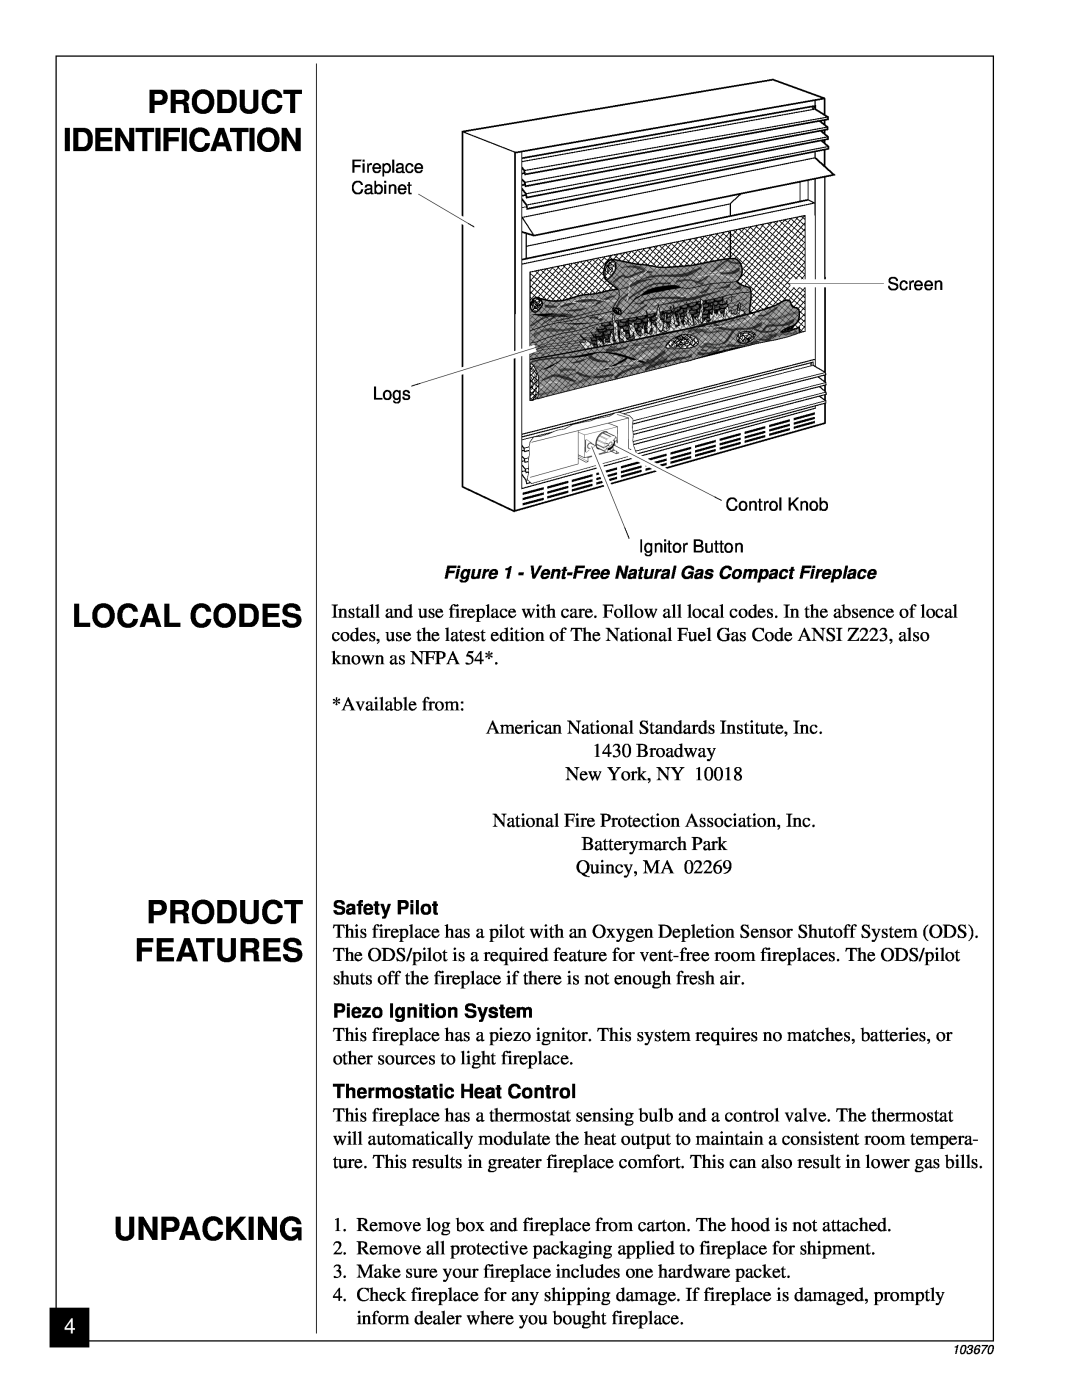 Vanguard Heating VMH10TN installation manual Product Identification, Local Codes, Features, Unpacking 